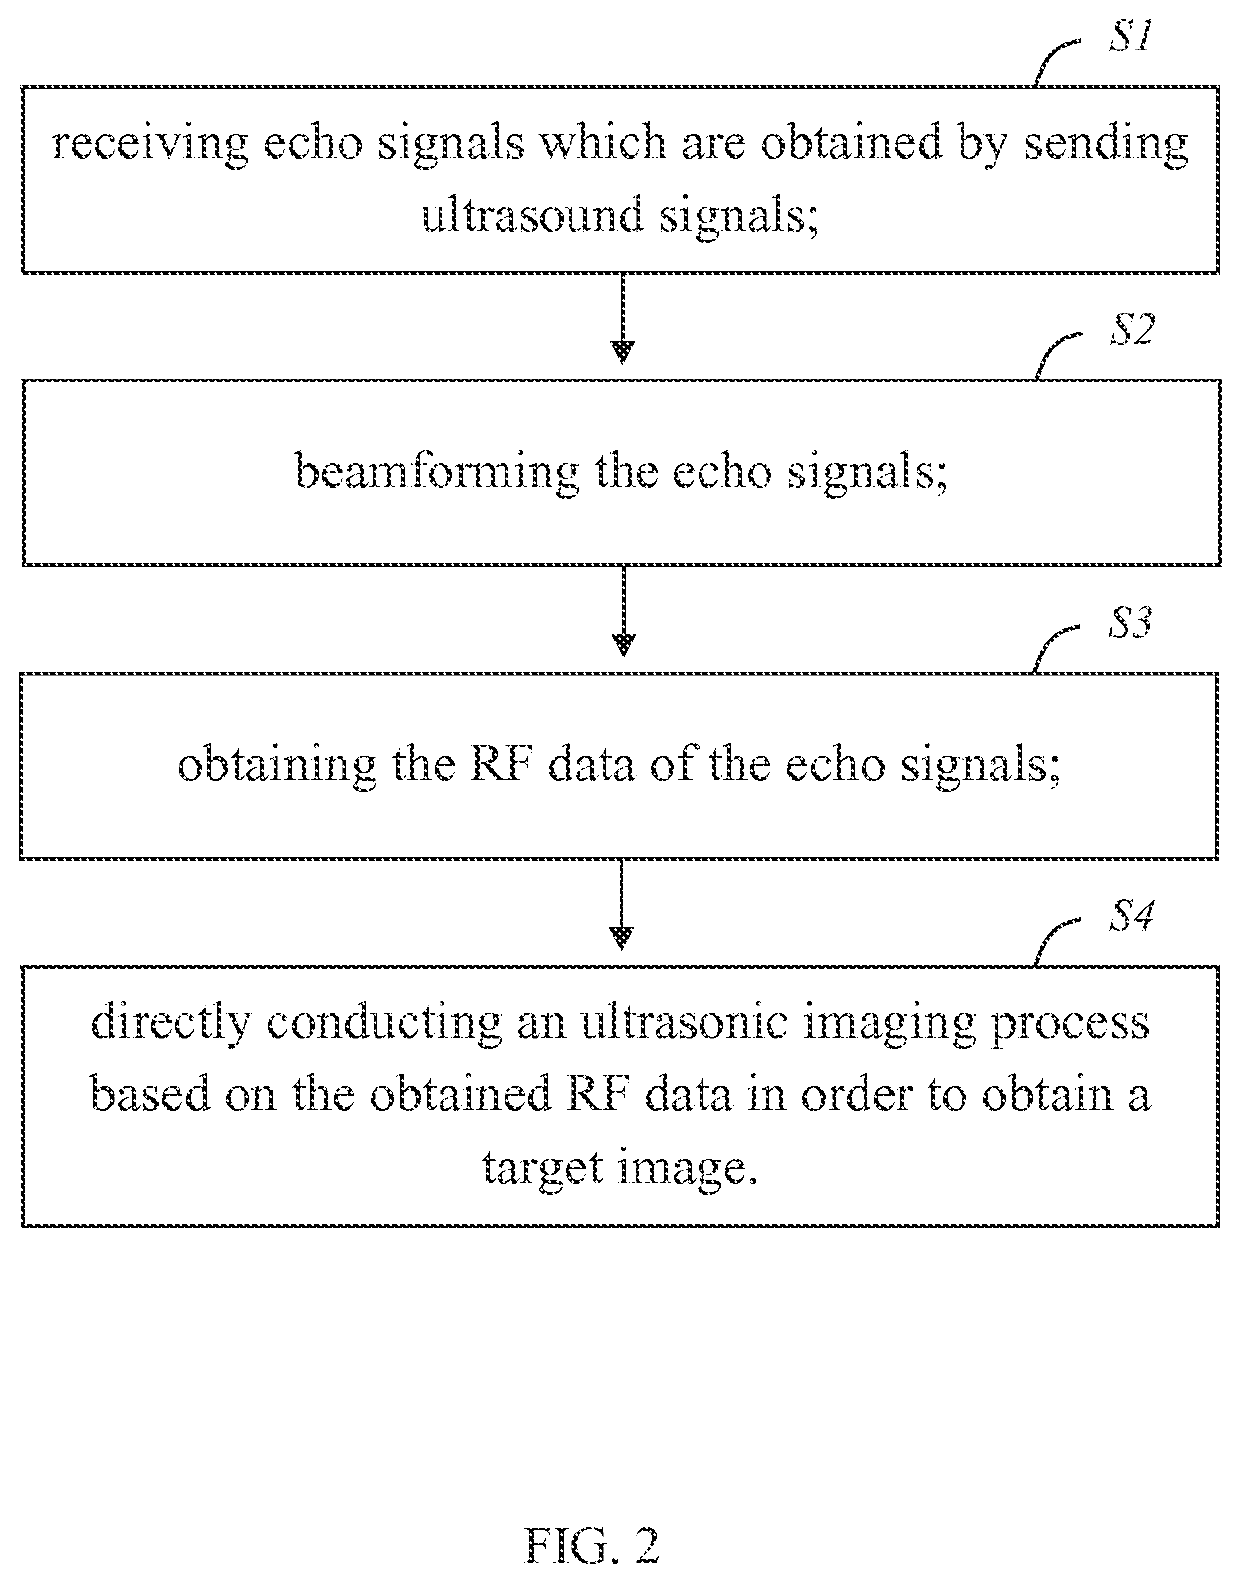 Ultrasonic imaging processing method and system based on RF data